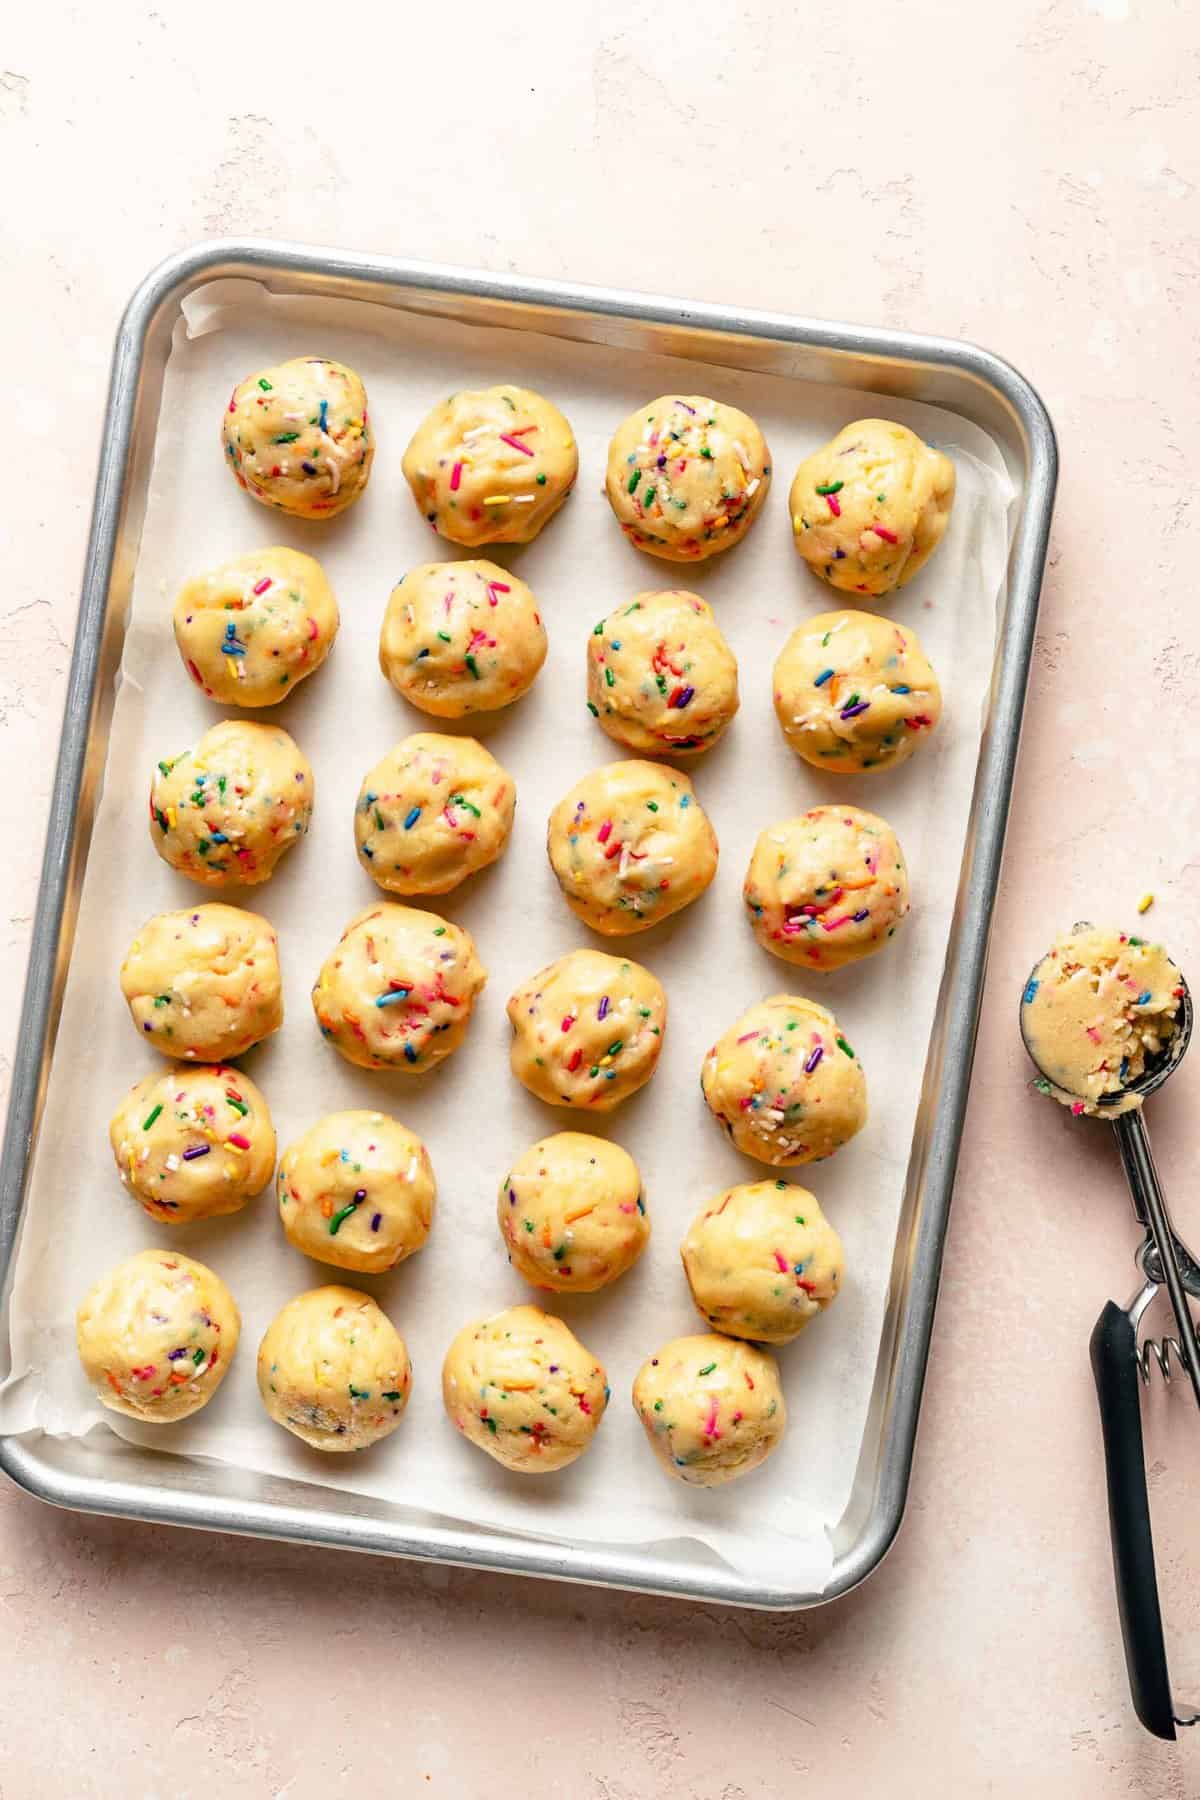 Shaping Funfetti cookie dough into cookies with a cookie scoop.